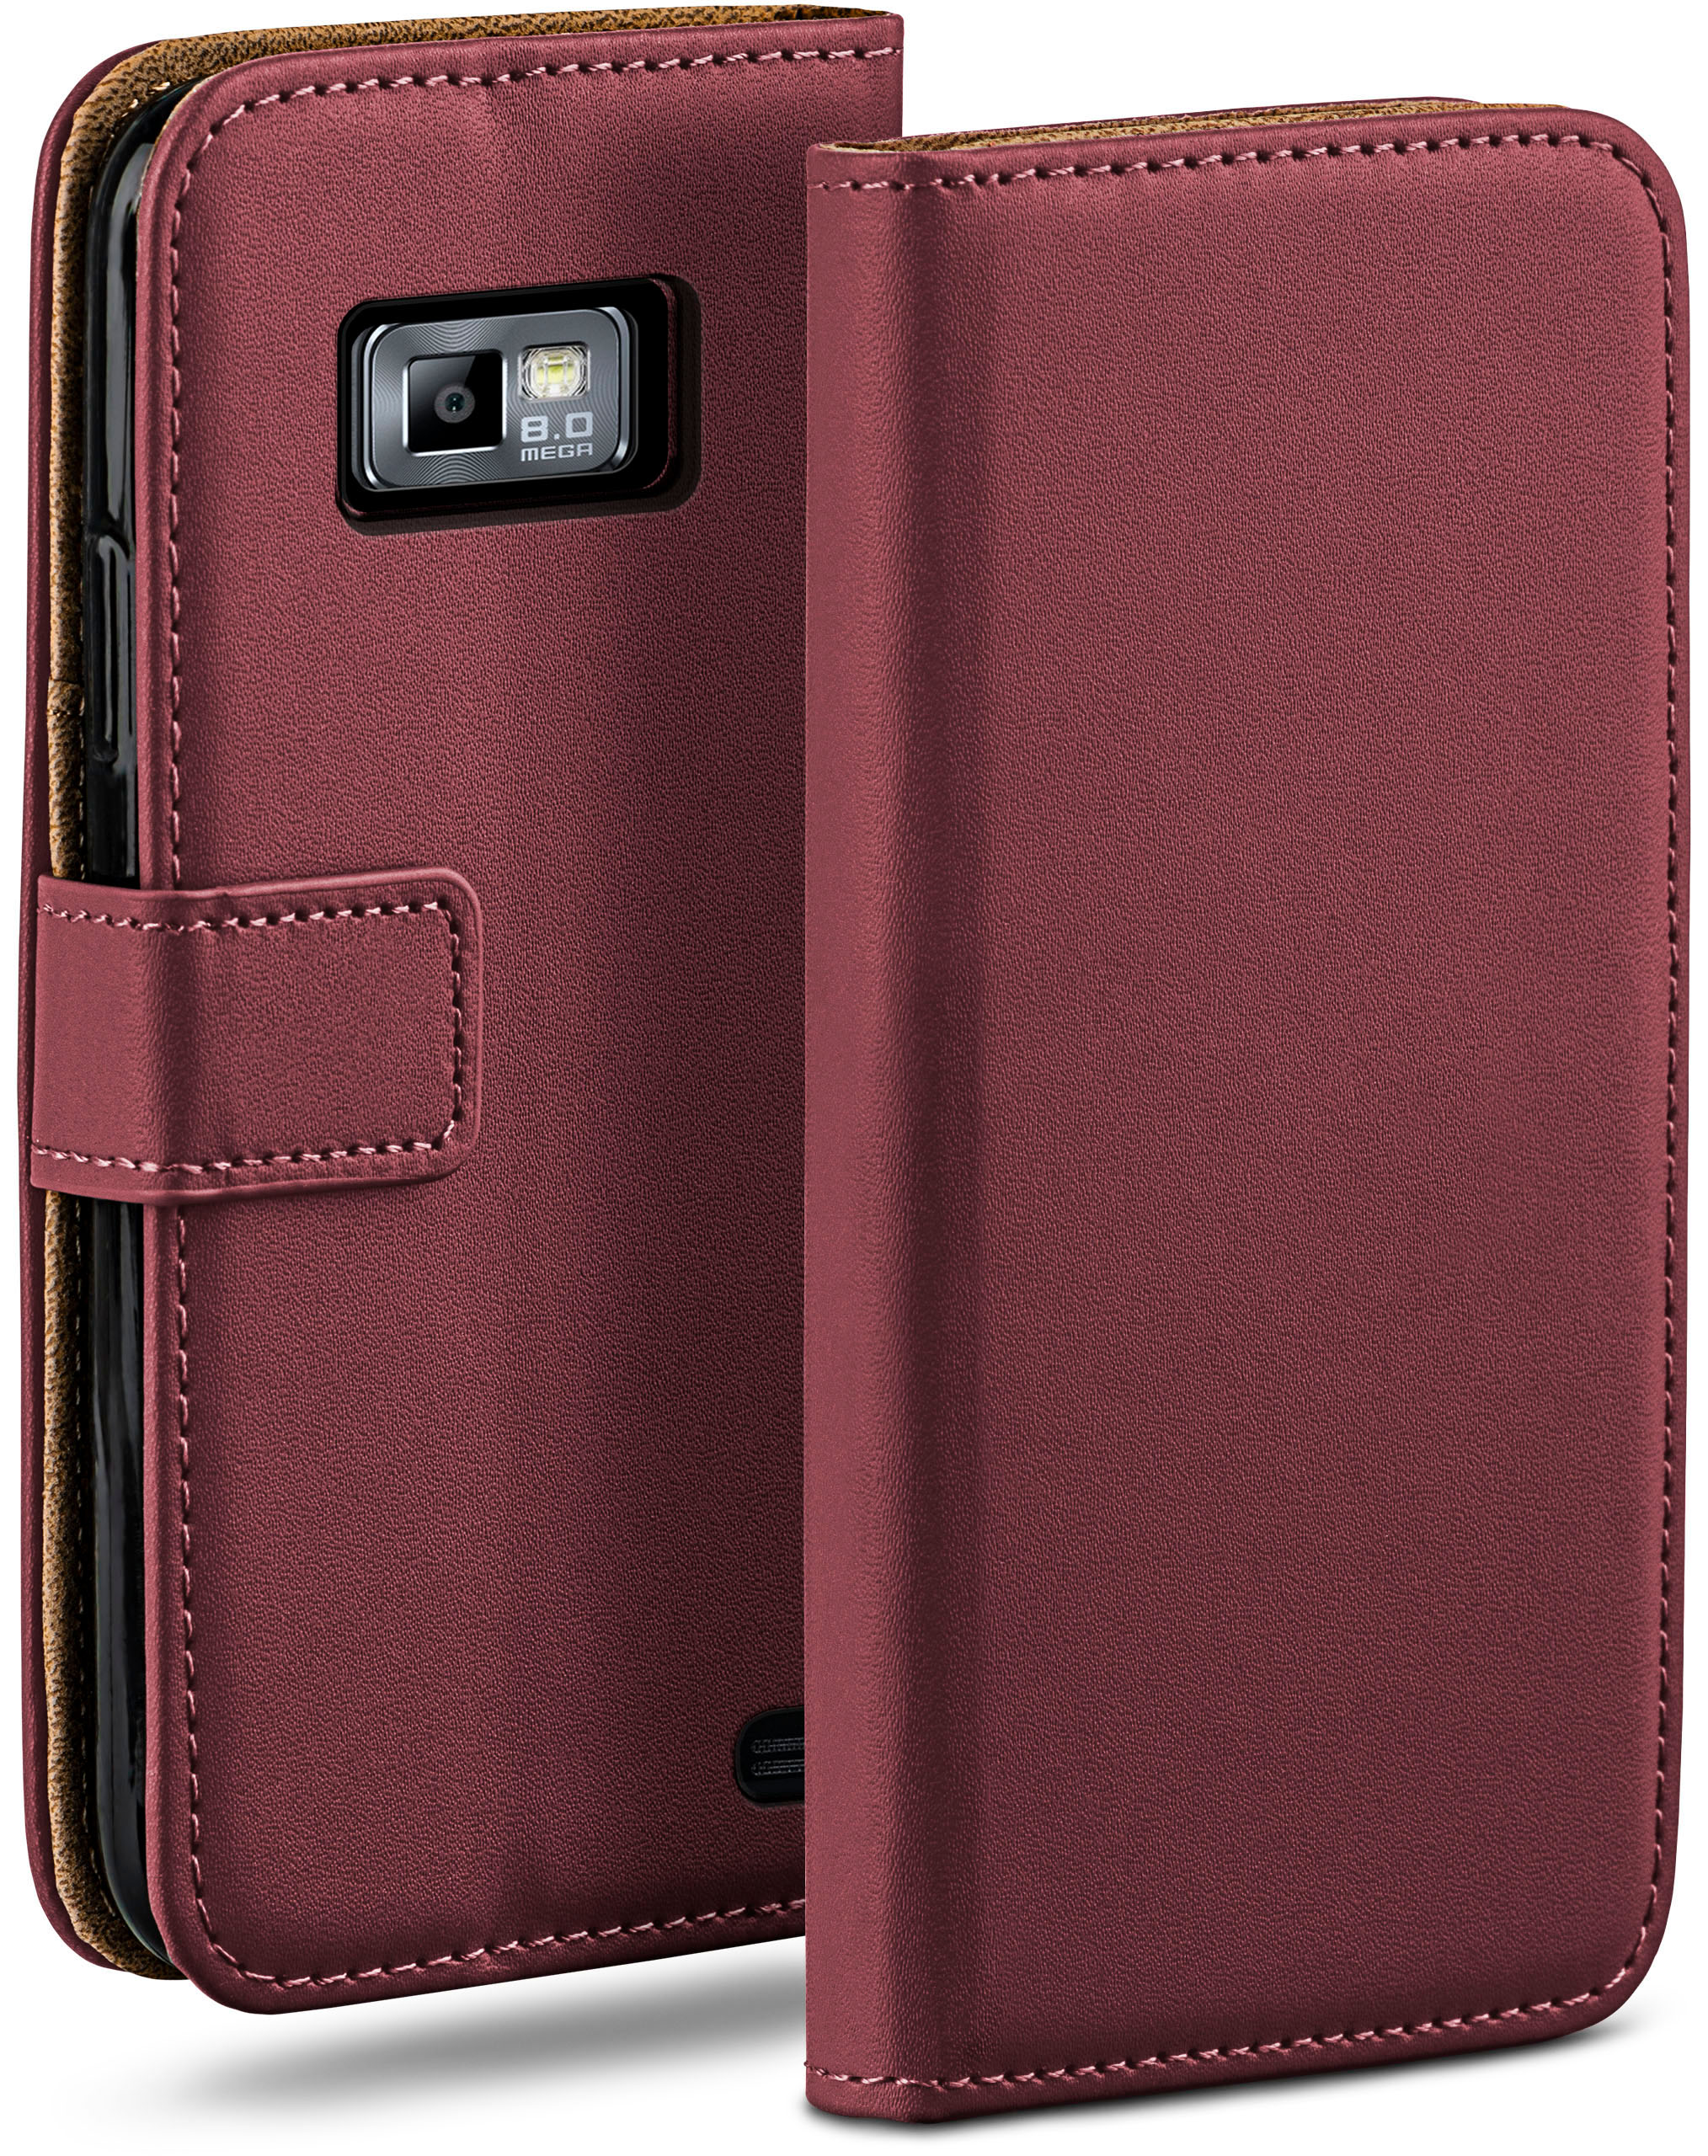 Bookcover, MOEX / Plus, Case, S2 S2 Book Galaxy Samsung, Maroon-Red